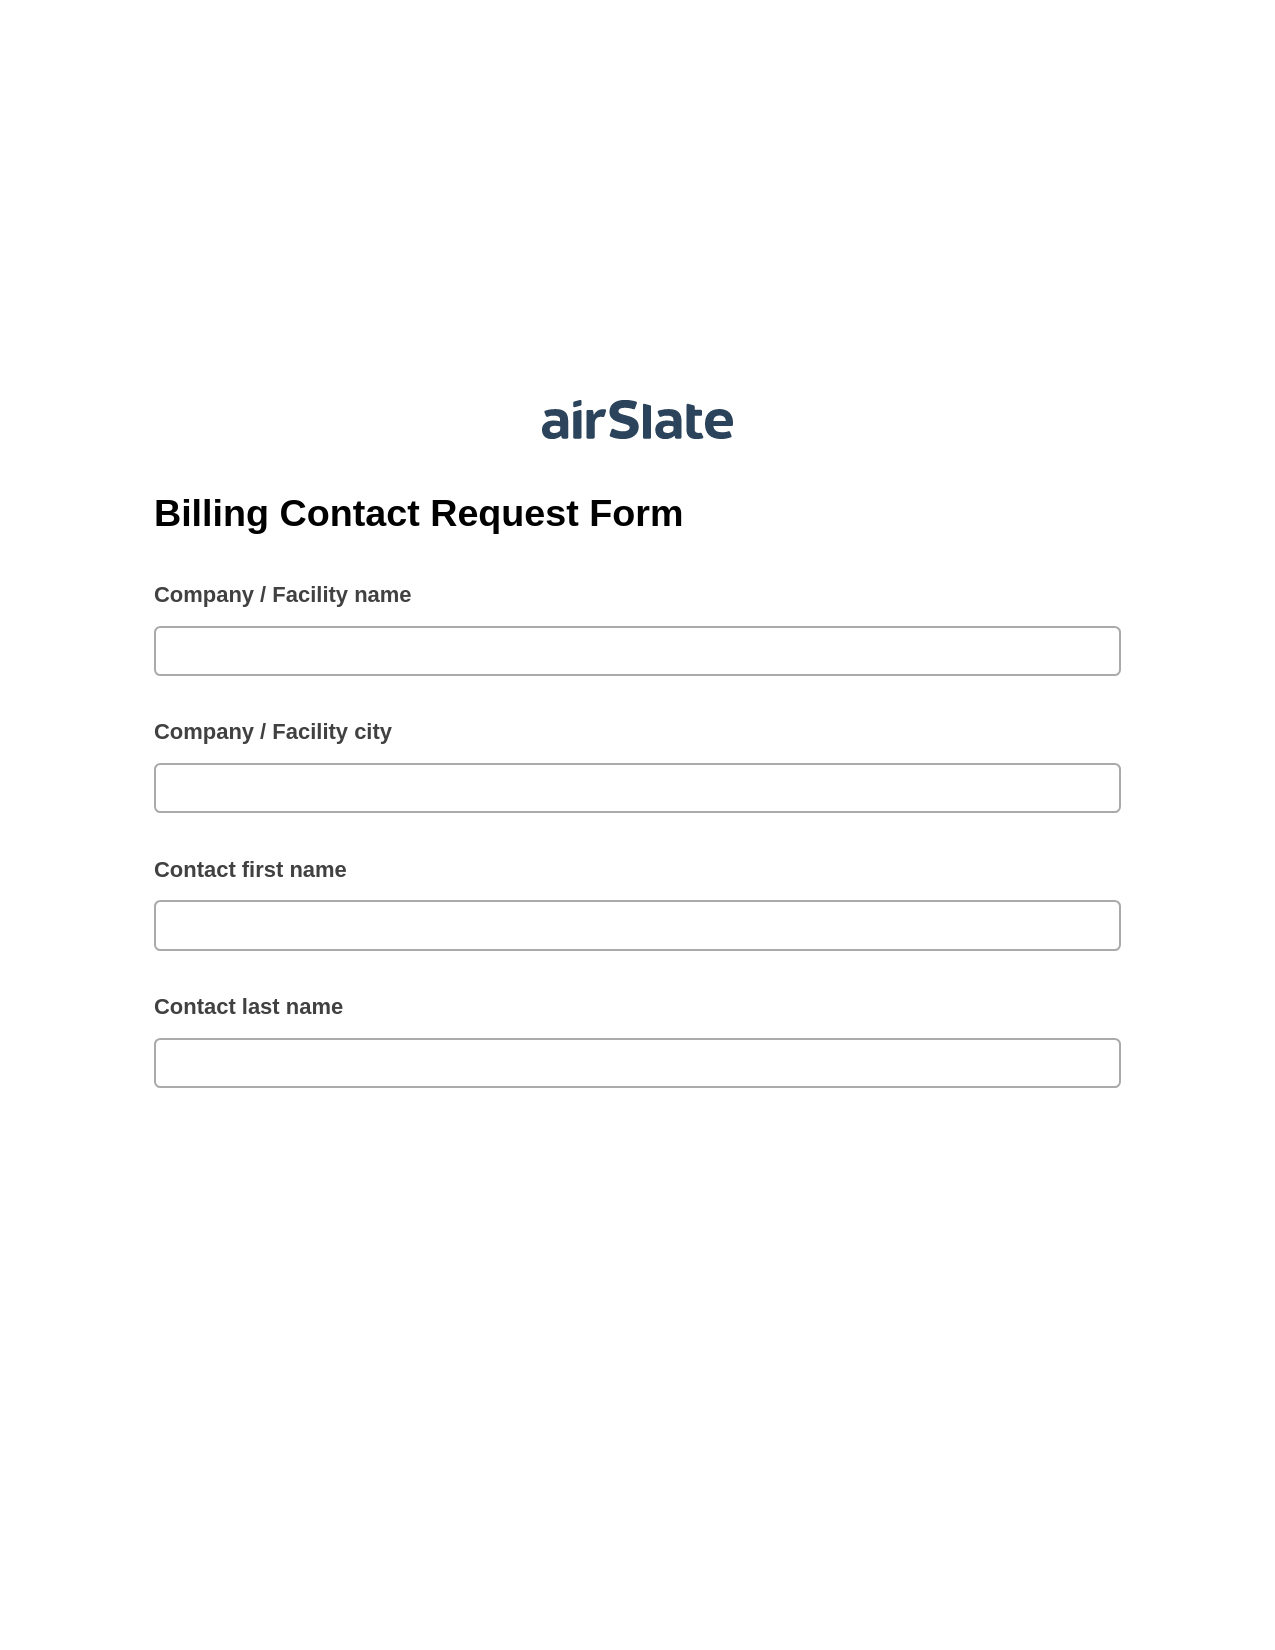 Multirole Billing Contact Request Form Pre-fill Dropdowns from MySQL Bot, Remove Slate Bot, Export to Formstack Documents Bot